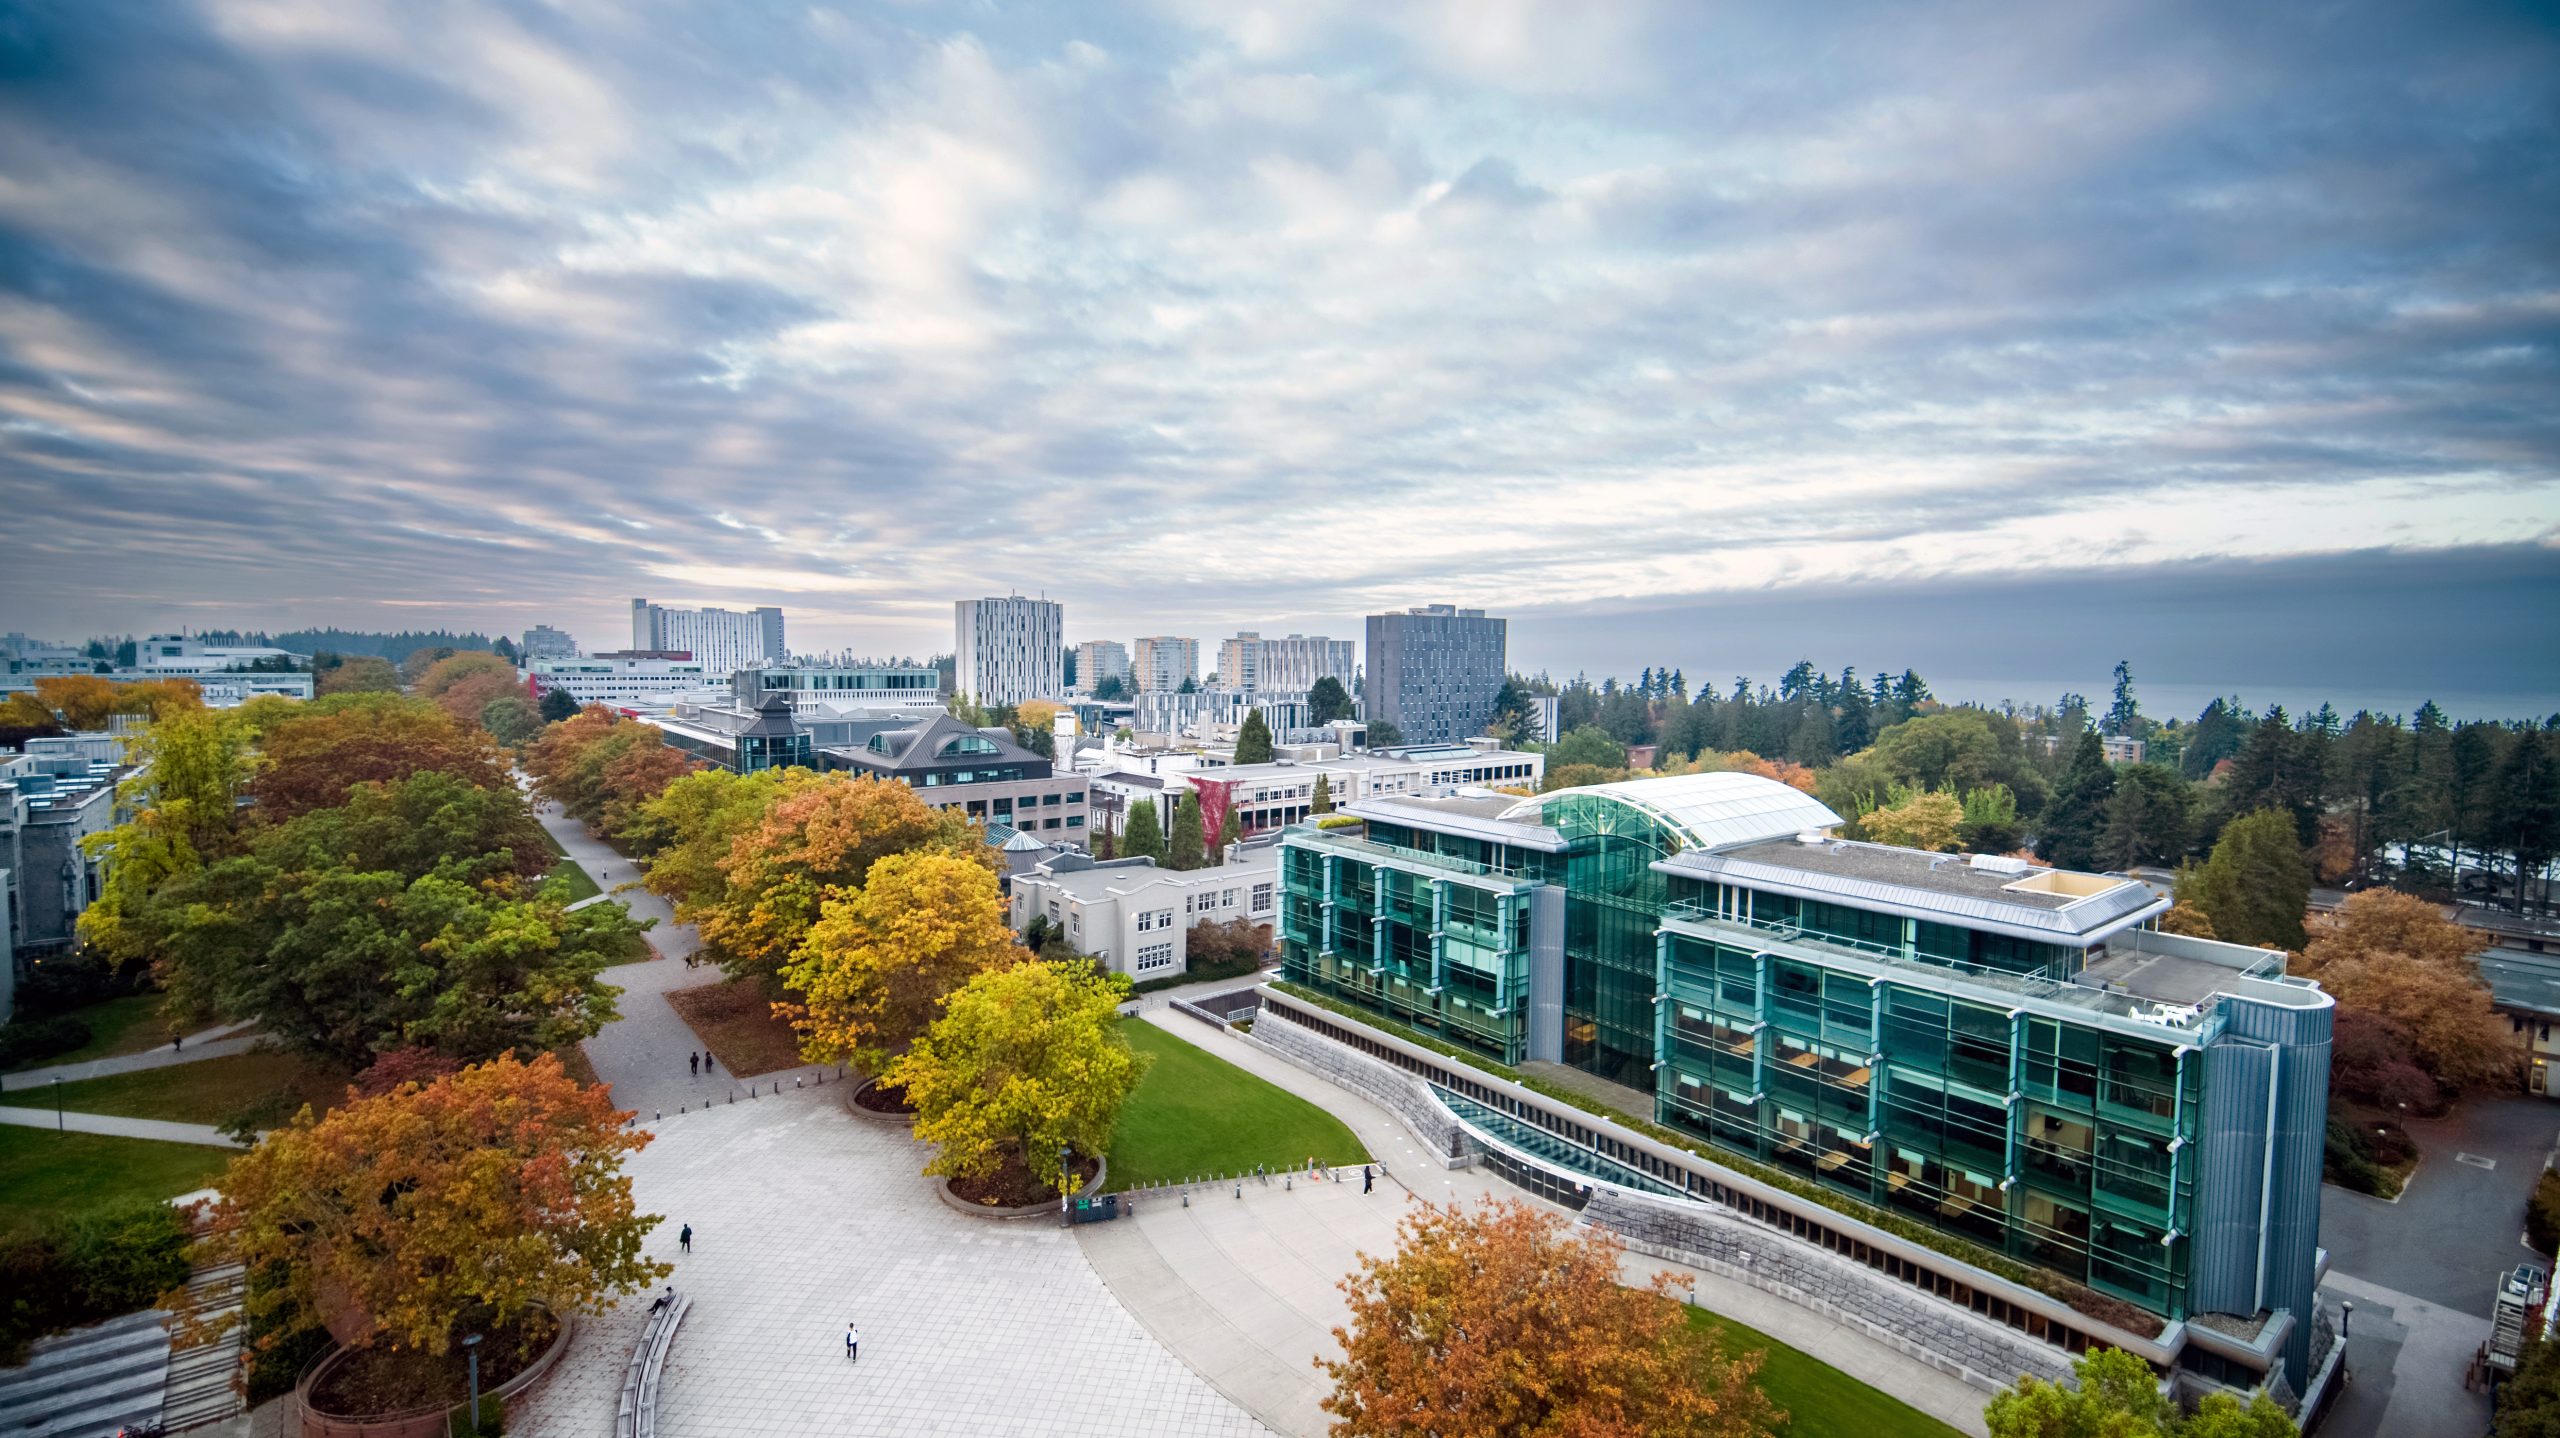 Aerial view of campus during autumn. Many trees with fall colours and a glass building in the foreground under an overcast sky.ding